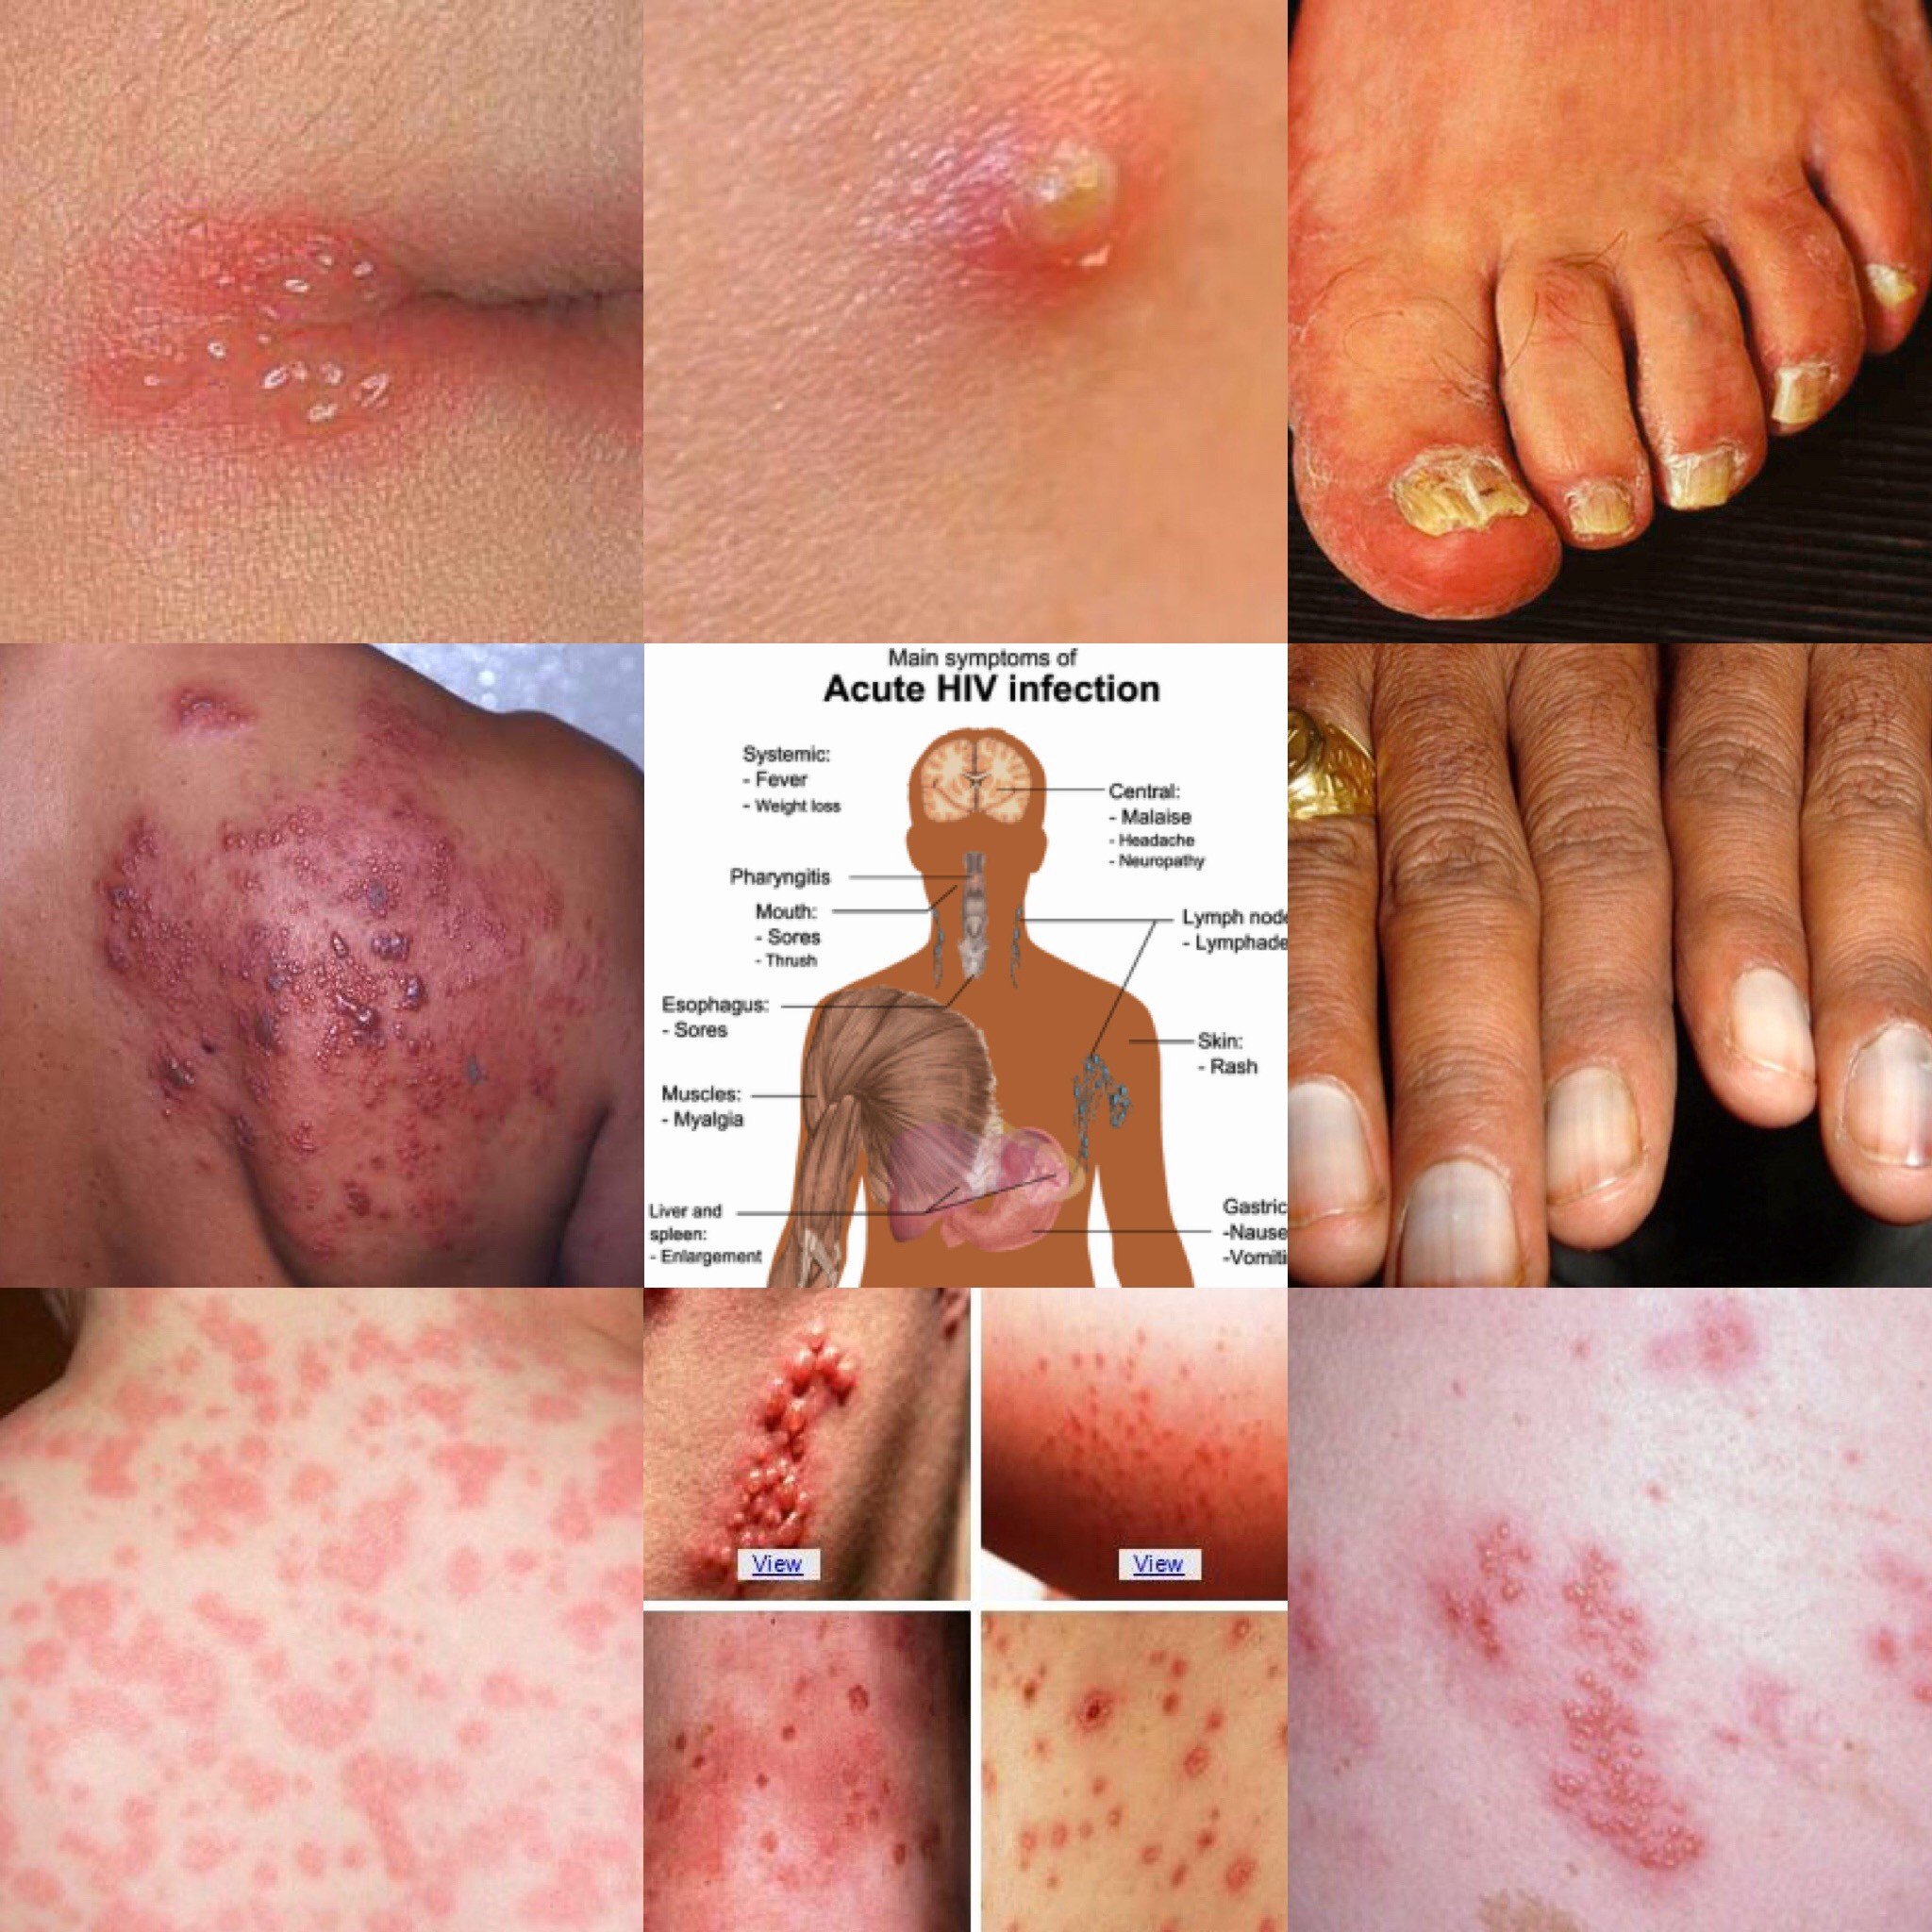 ONE OF HIV SYMPTOMS IS RASH. A VERY IMPORTANT ARTICLE TO READ